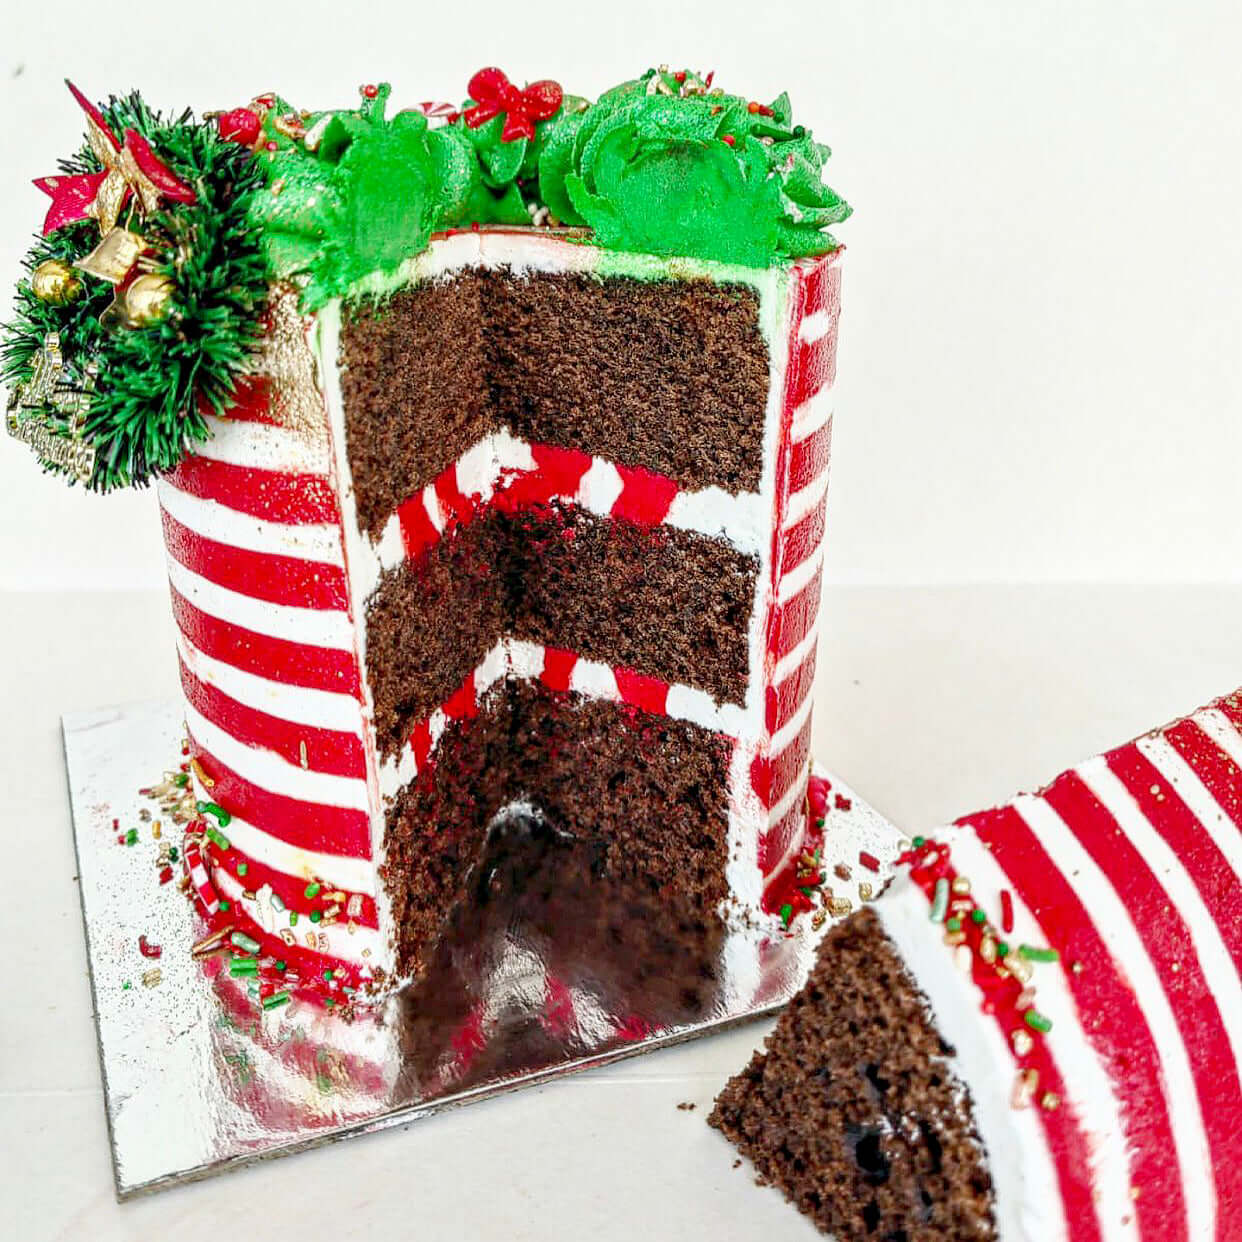 Christmas-Mini-Cake-Red-and-White-striped-inside-Dodomarket-delivery-Mauritius